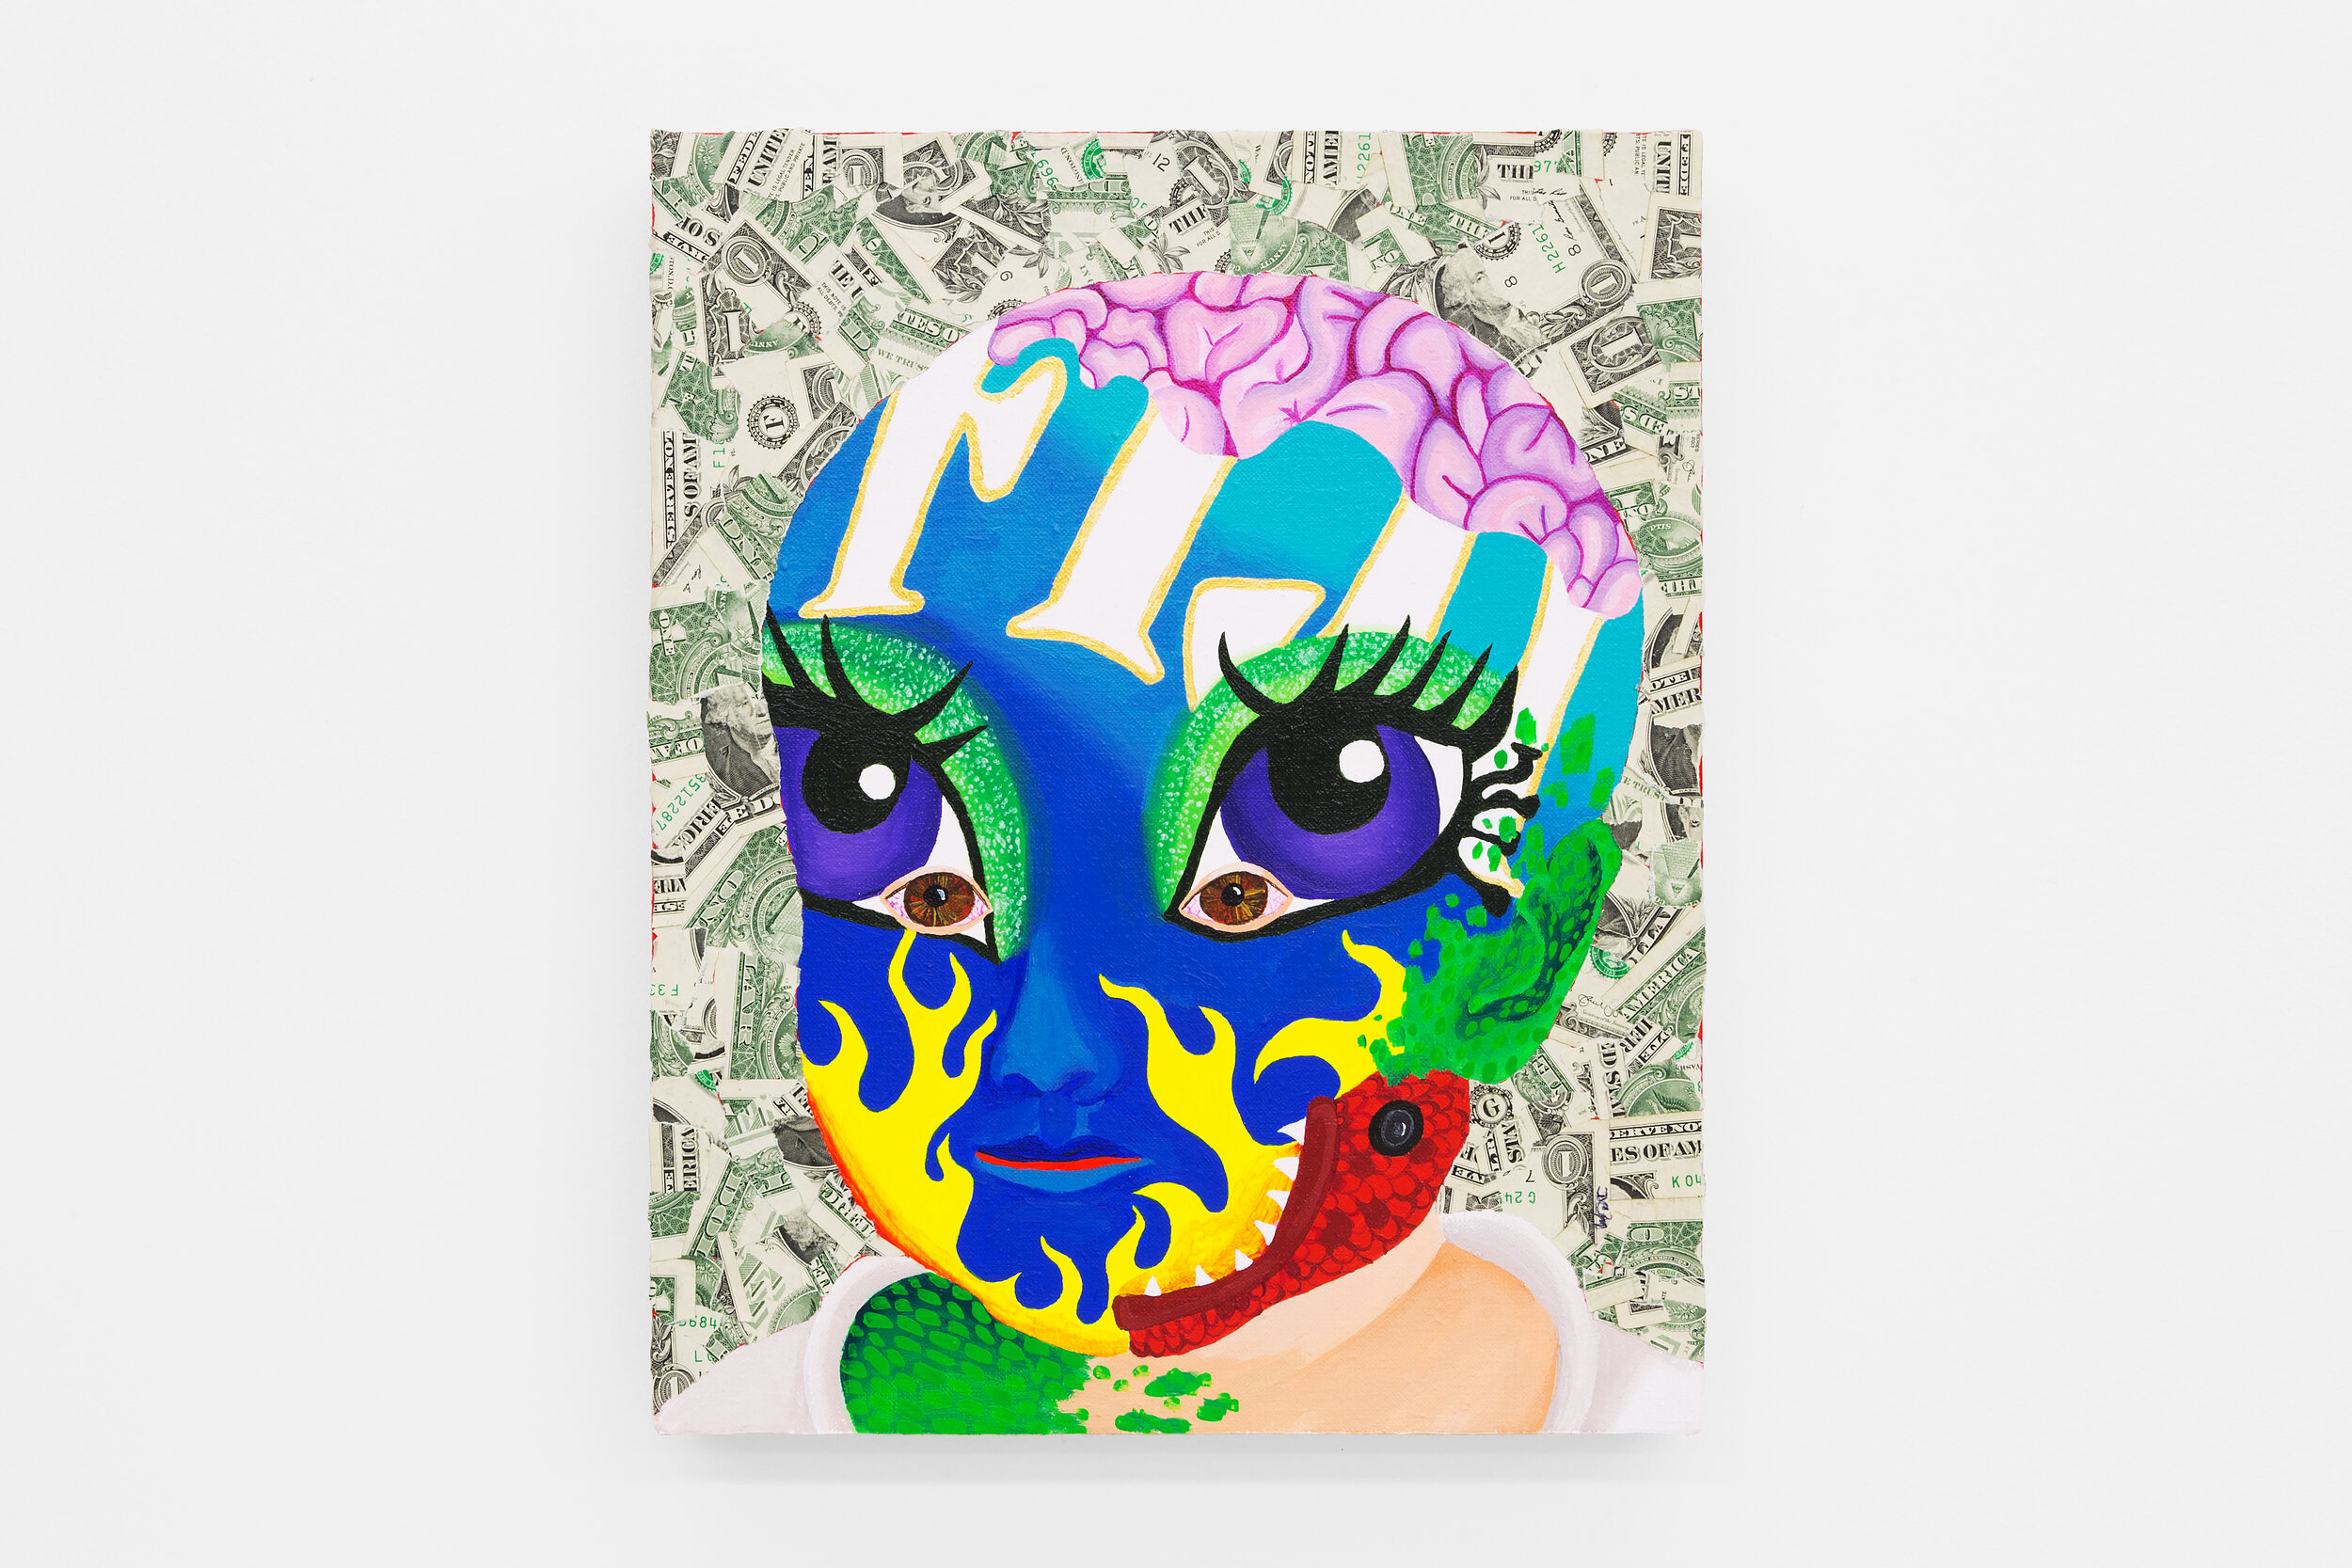   Baby Boy with Water and Fire Face Paint,  2019  15 x 12 x 1.5 inches (38.1 x 30.48 x 3.81 cm.)  Acrylic and dollar bills on linen  